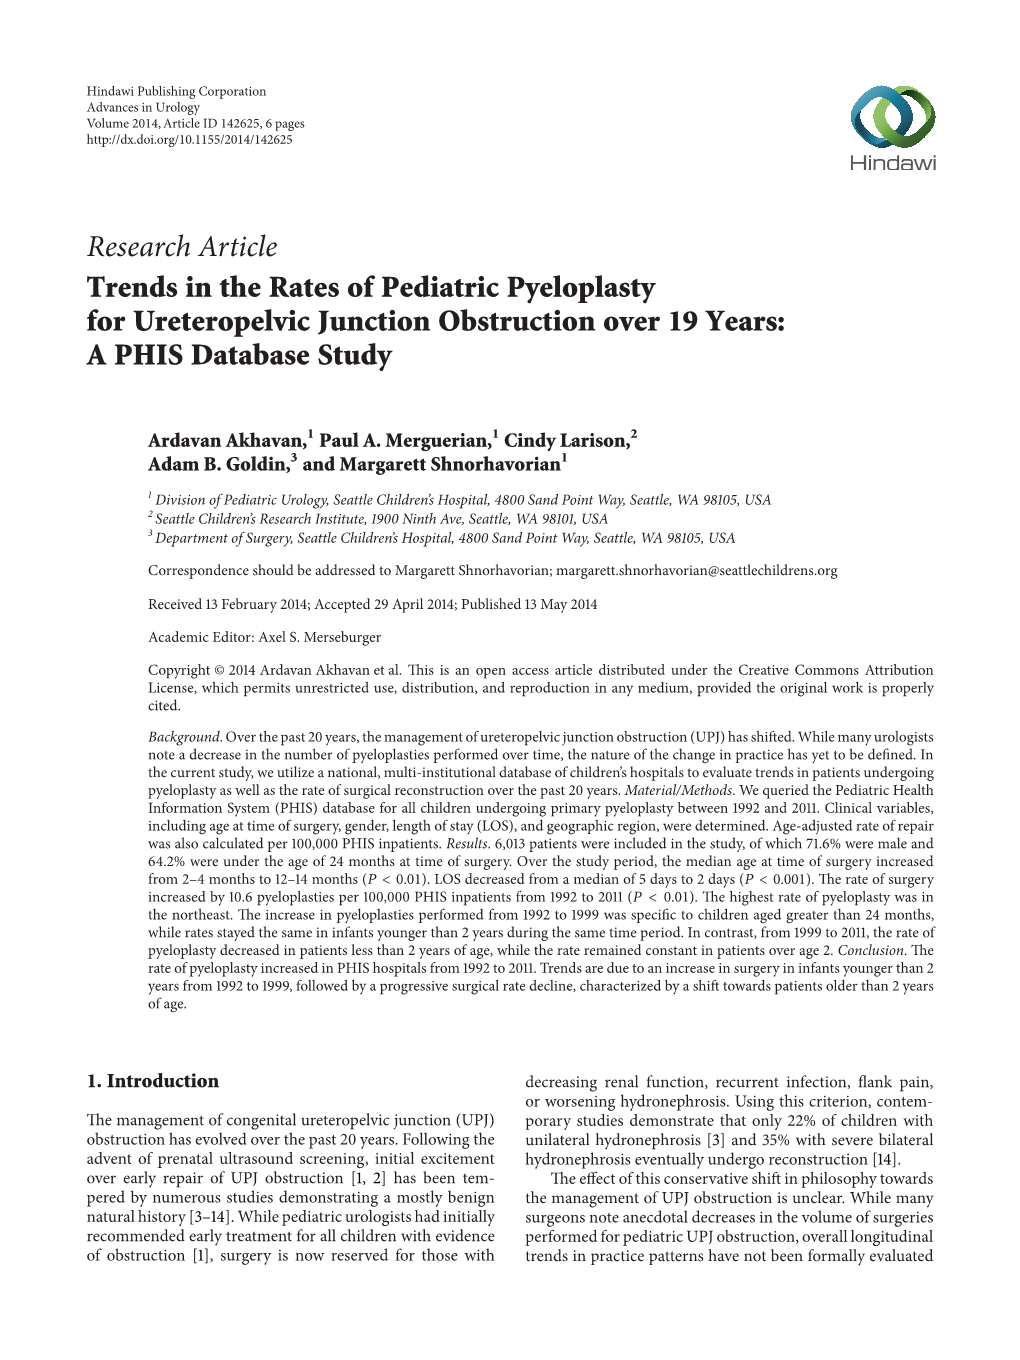 Research Article Trends in the Rates of Pediatric Pyeloplasty for Ureteropelvic Junction Obstruction Over 19 Years: a PHIS Database Study